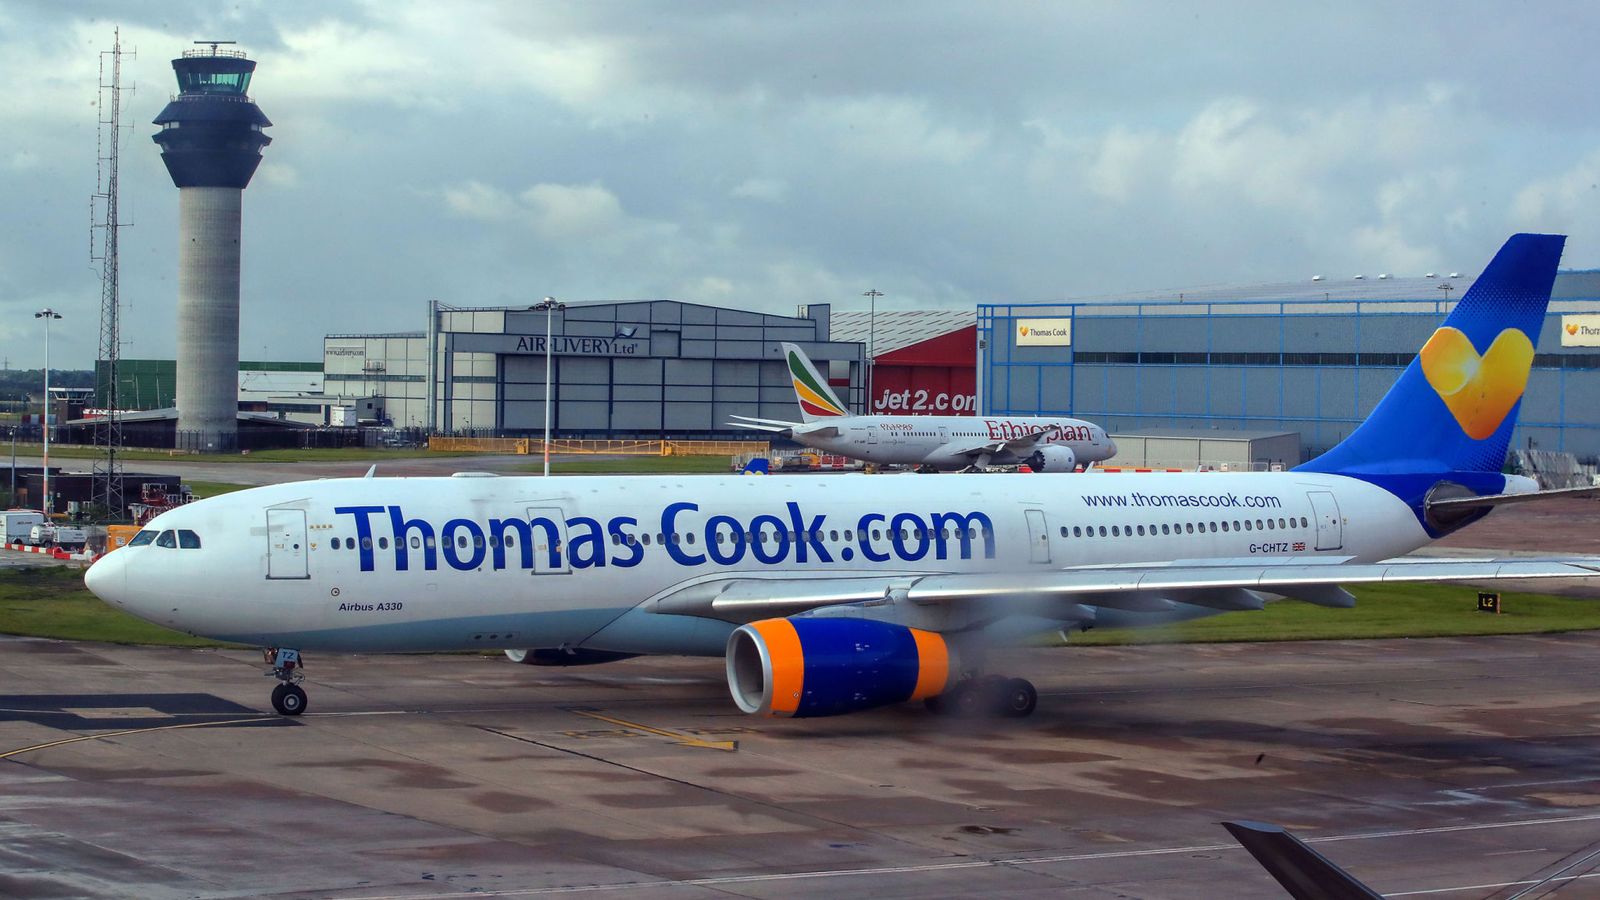 UPDATE 1-UK plans to fly 135,300 people back after Thomas Cook collapse